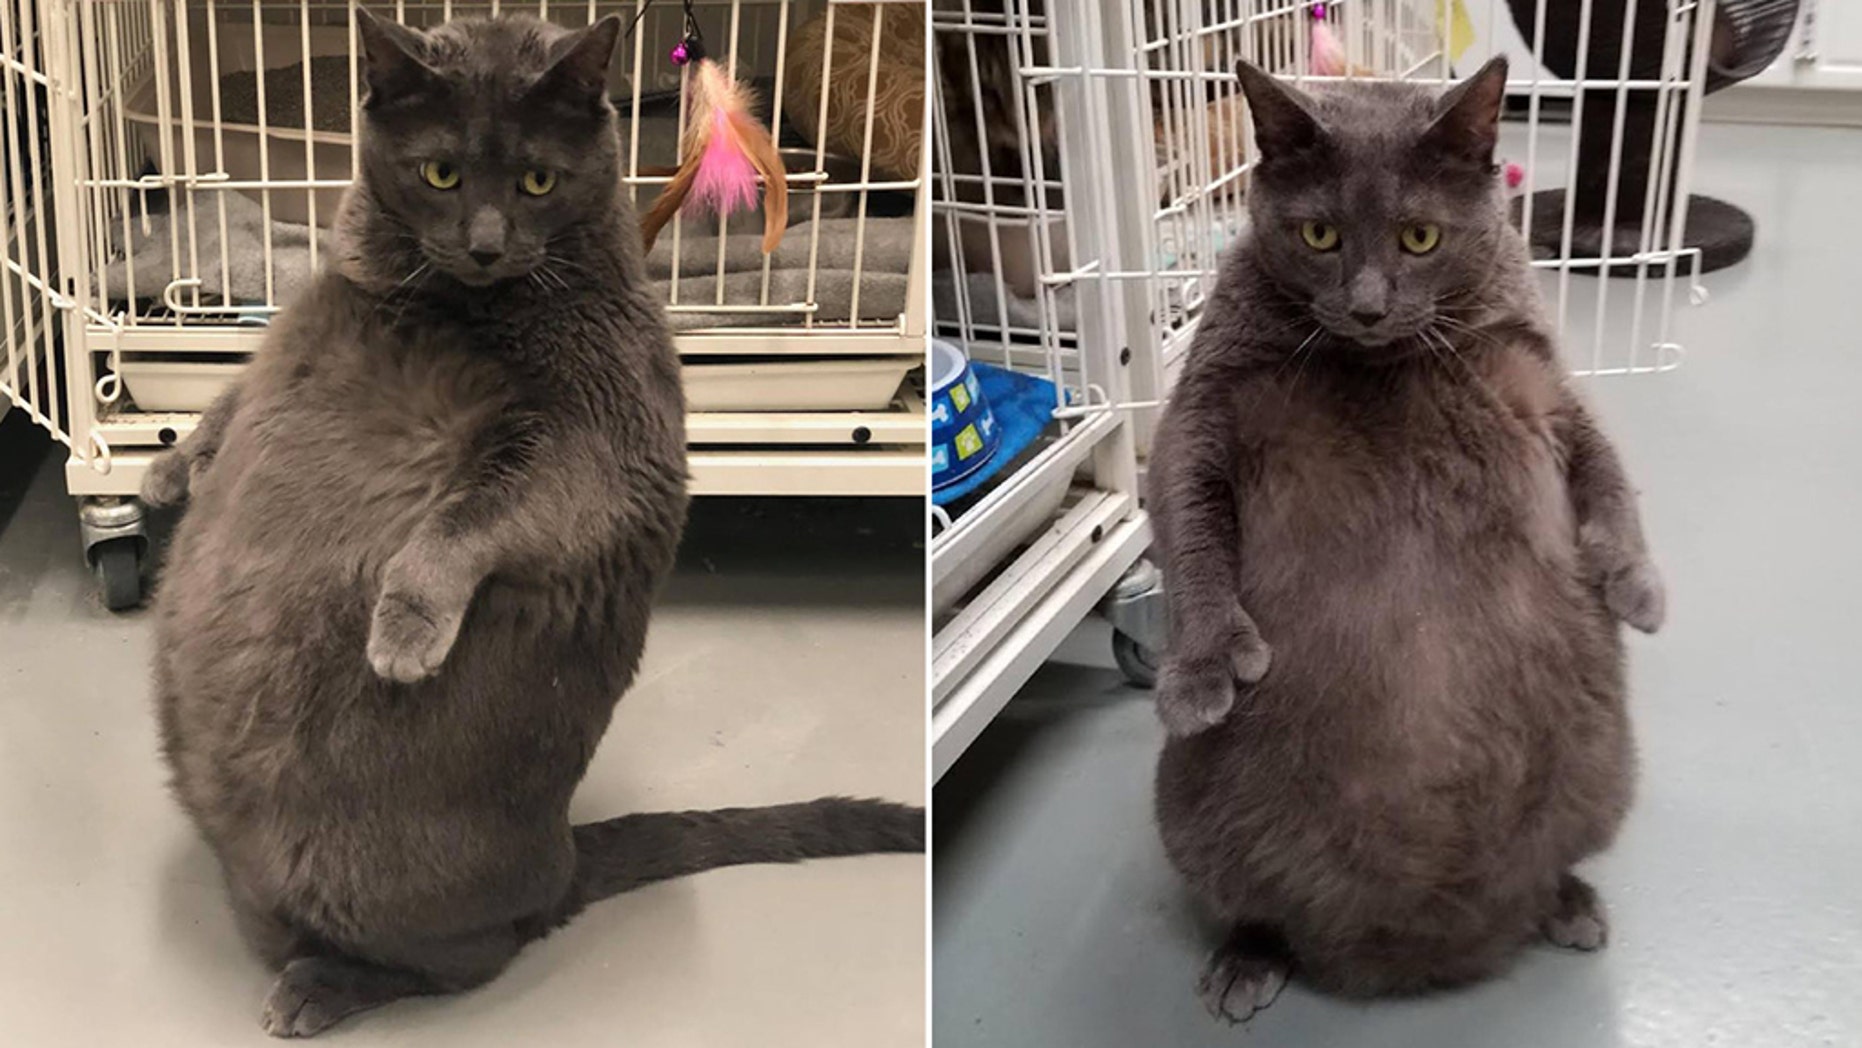 Fat Cat Who Sits On Hind Legs Seeks Adoption In Viral Social Media Post